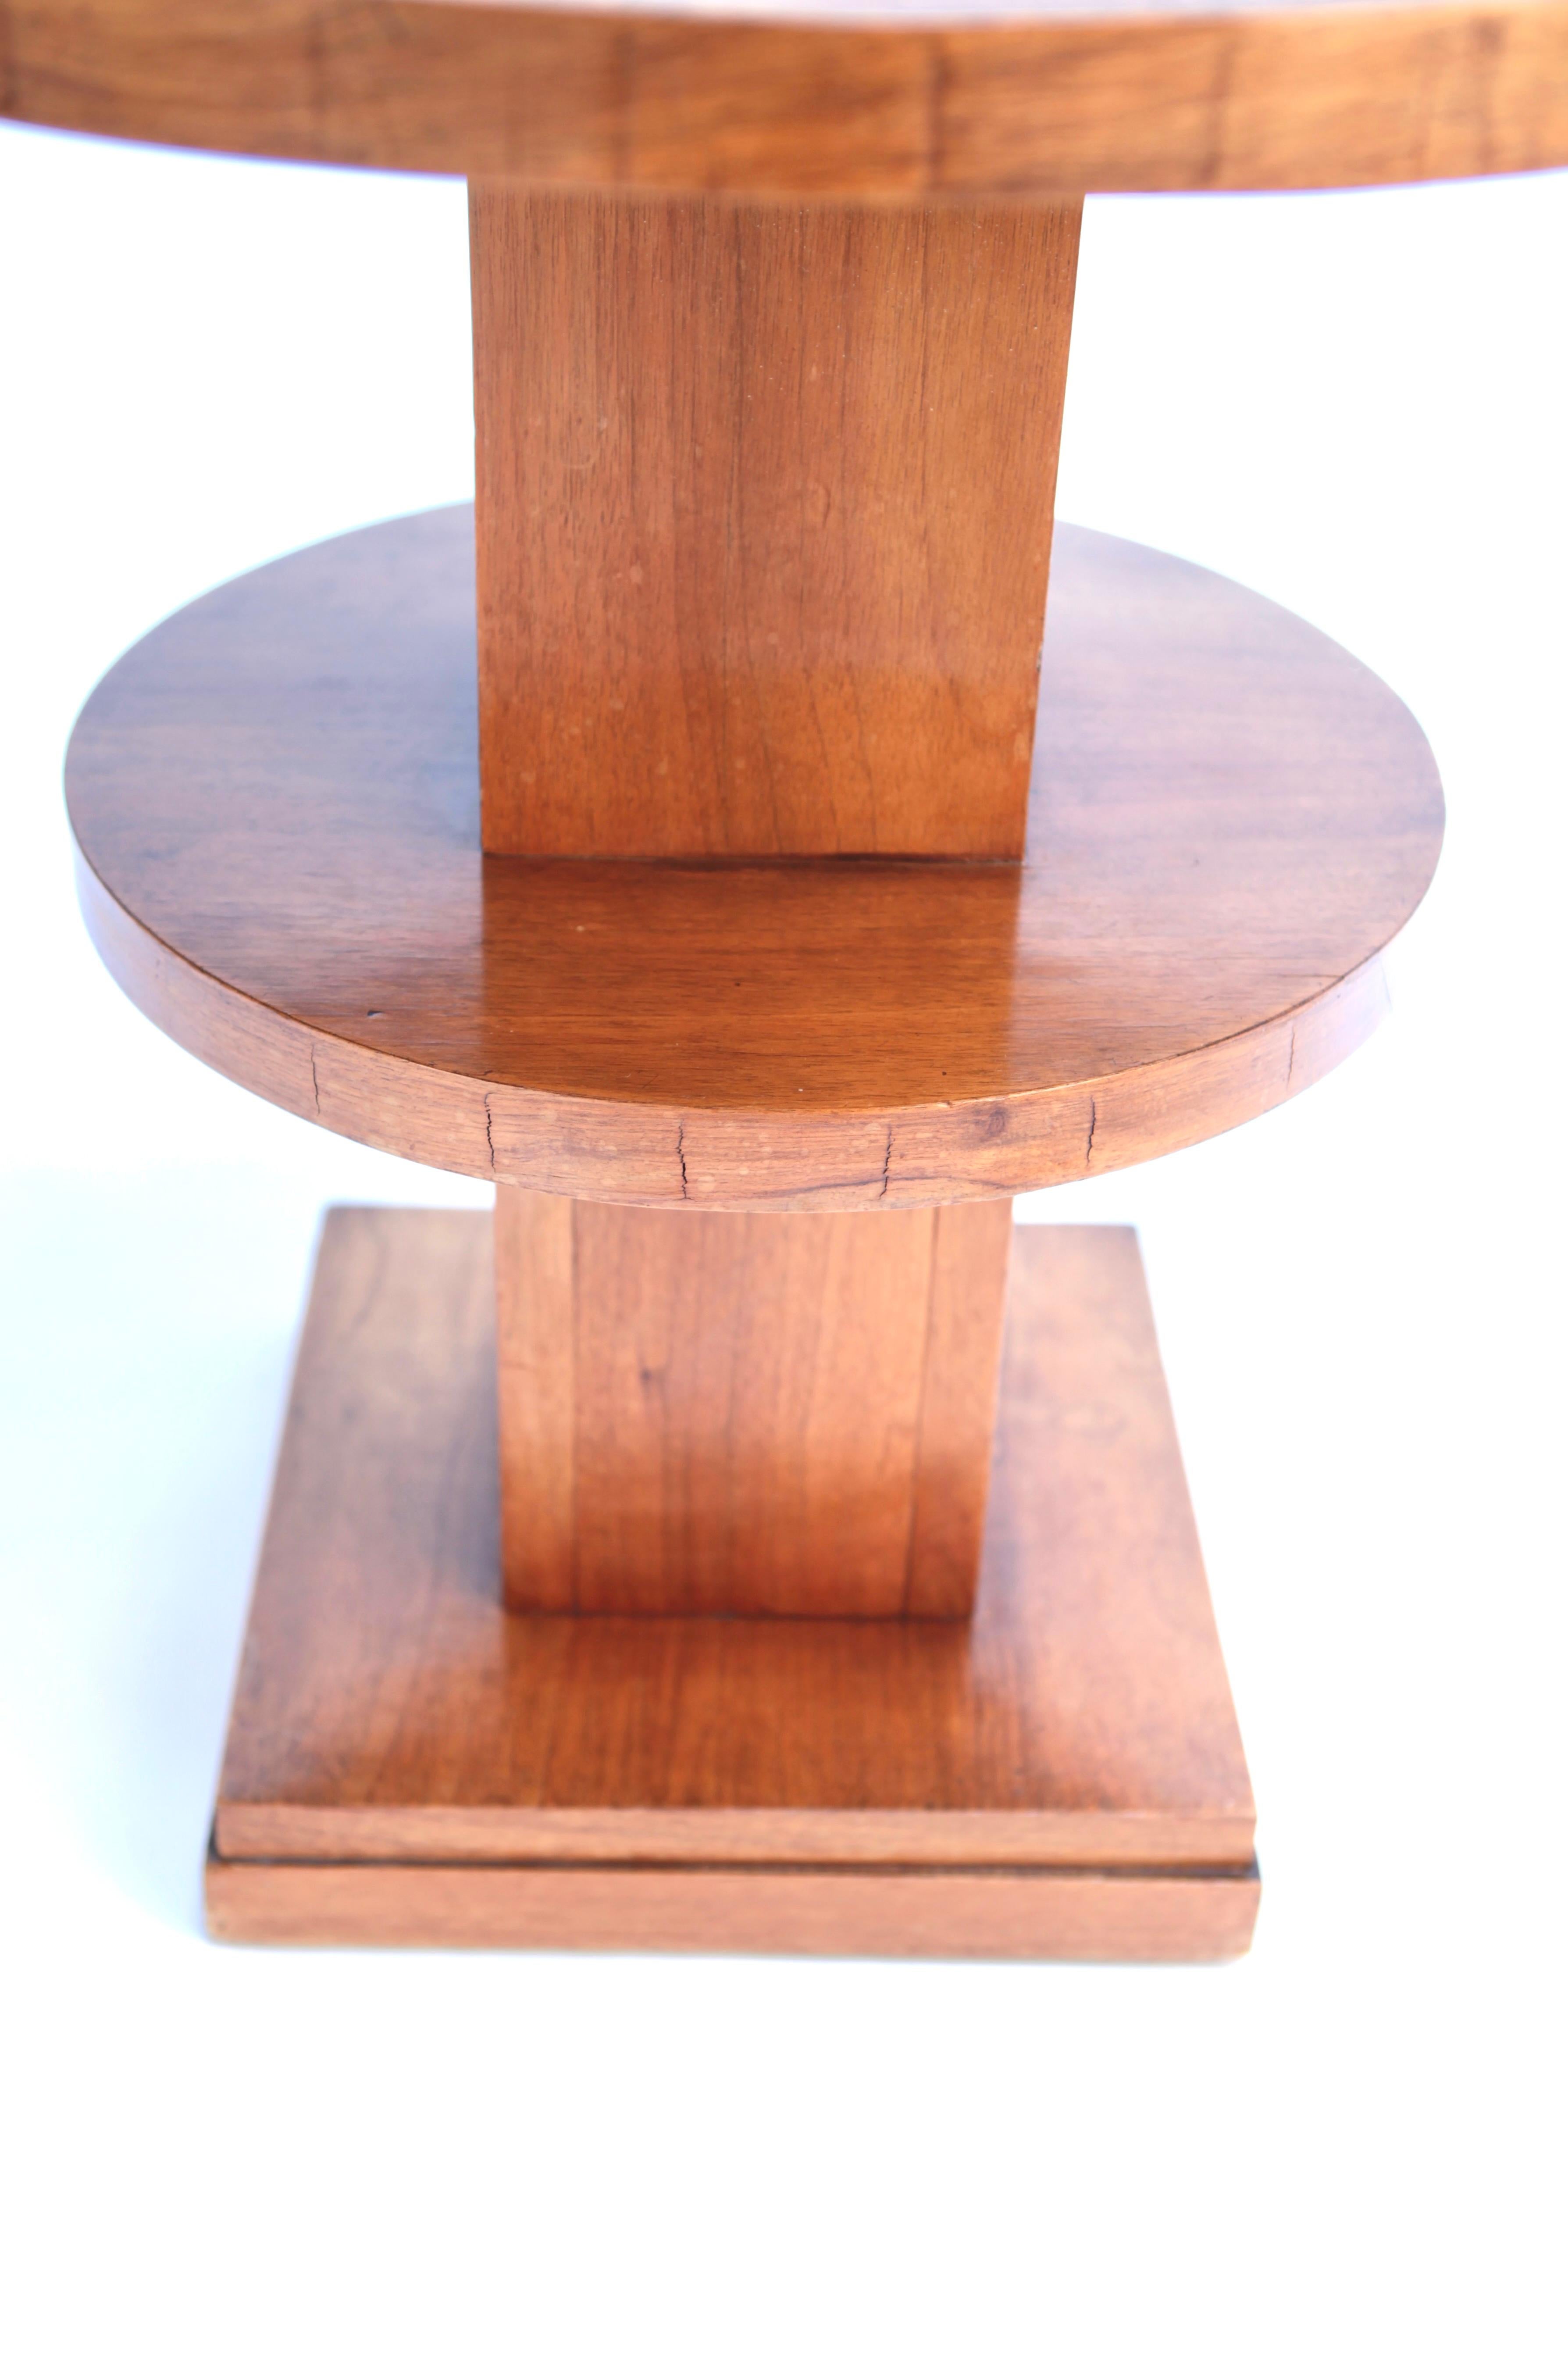 A French Art Deco Side Table, Wood Inlayed & Veneer, France 1930s For Sale 1